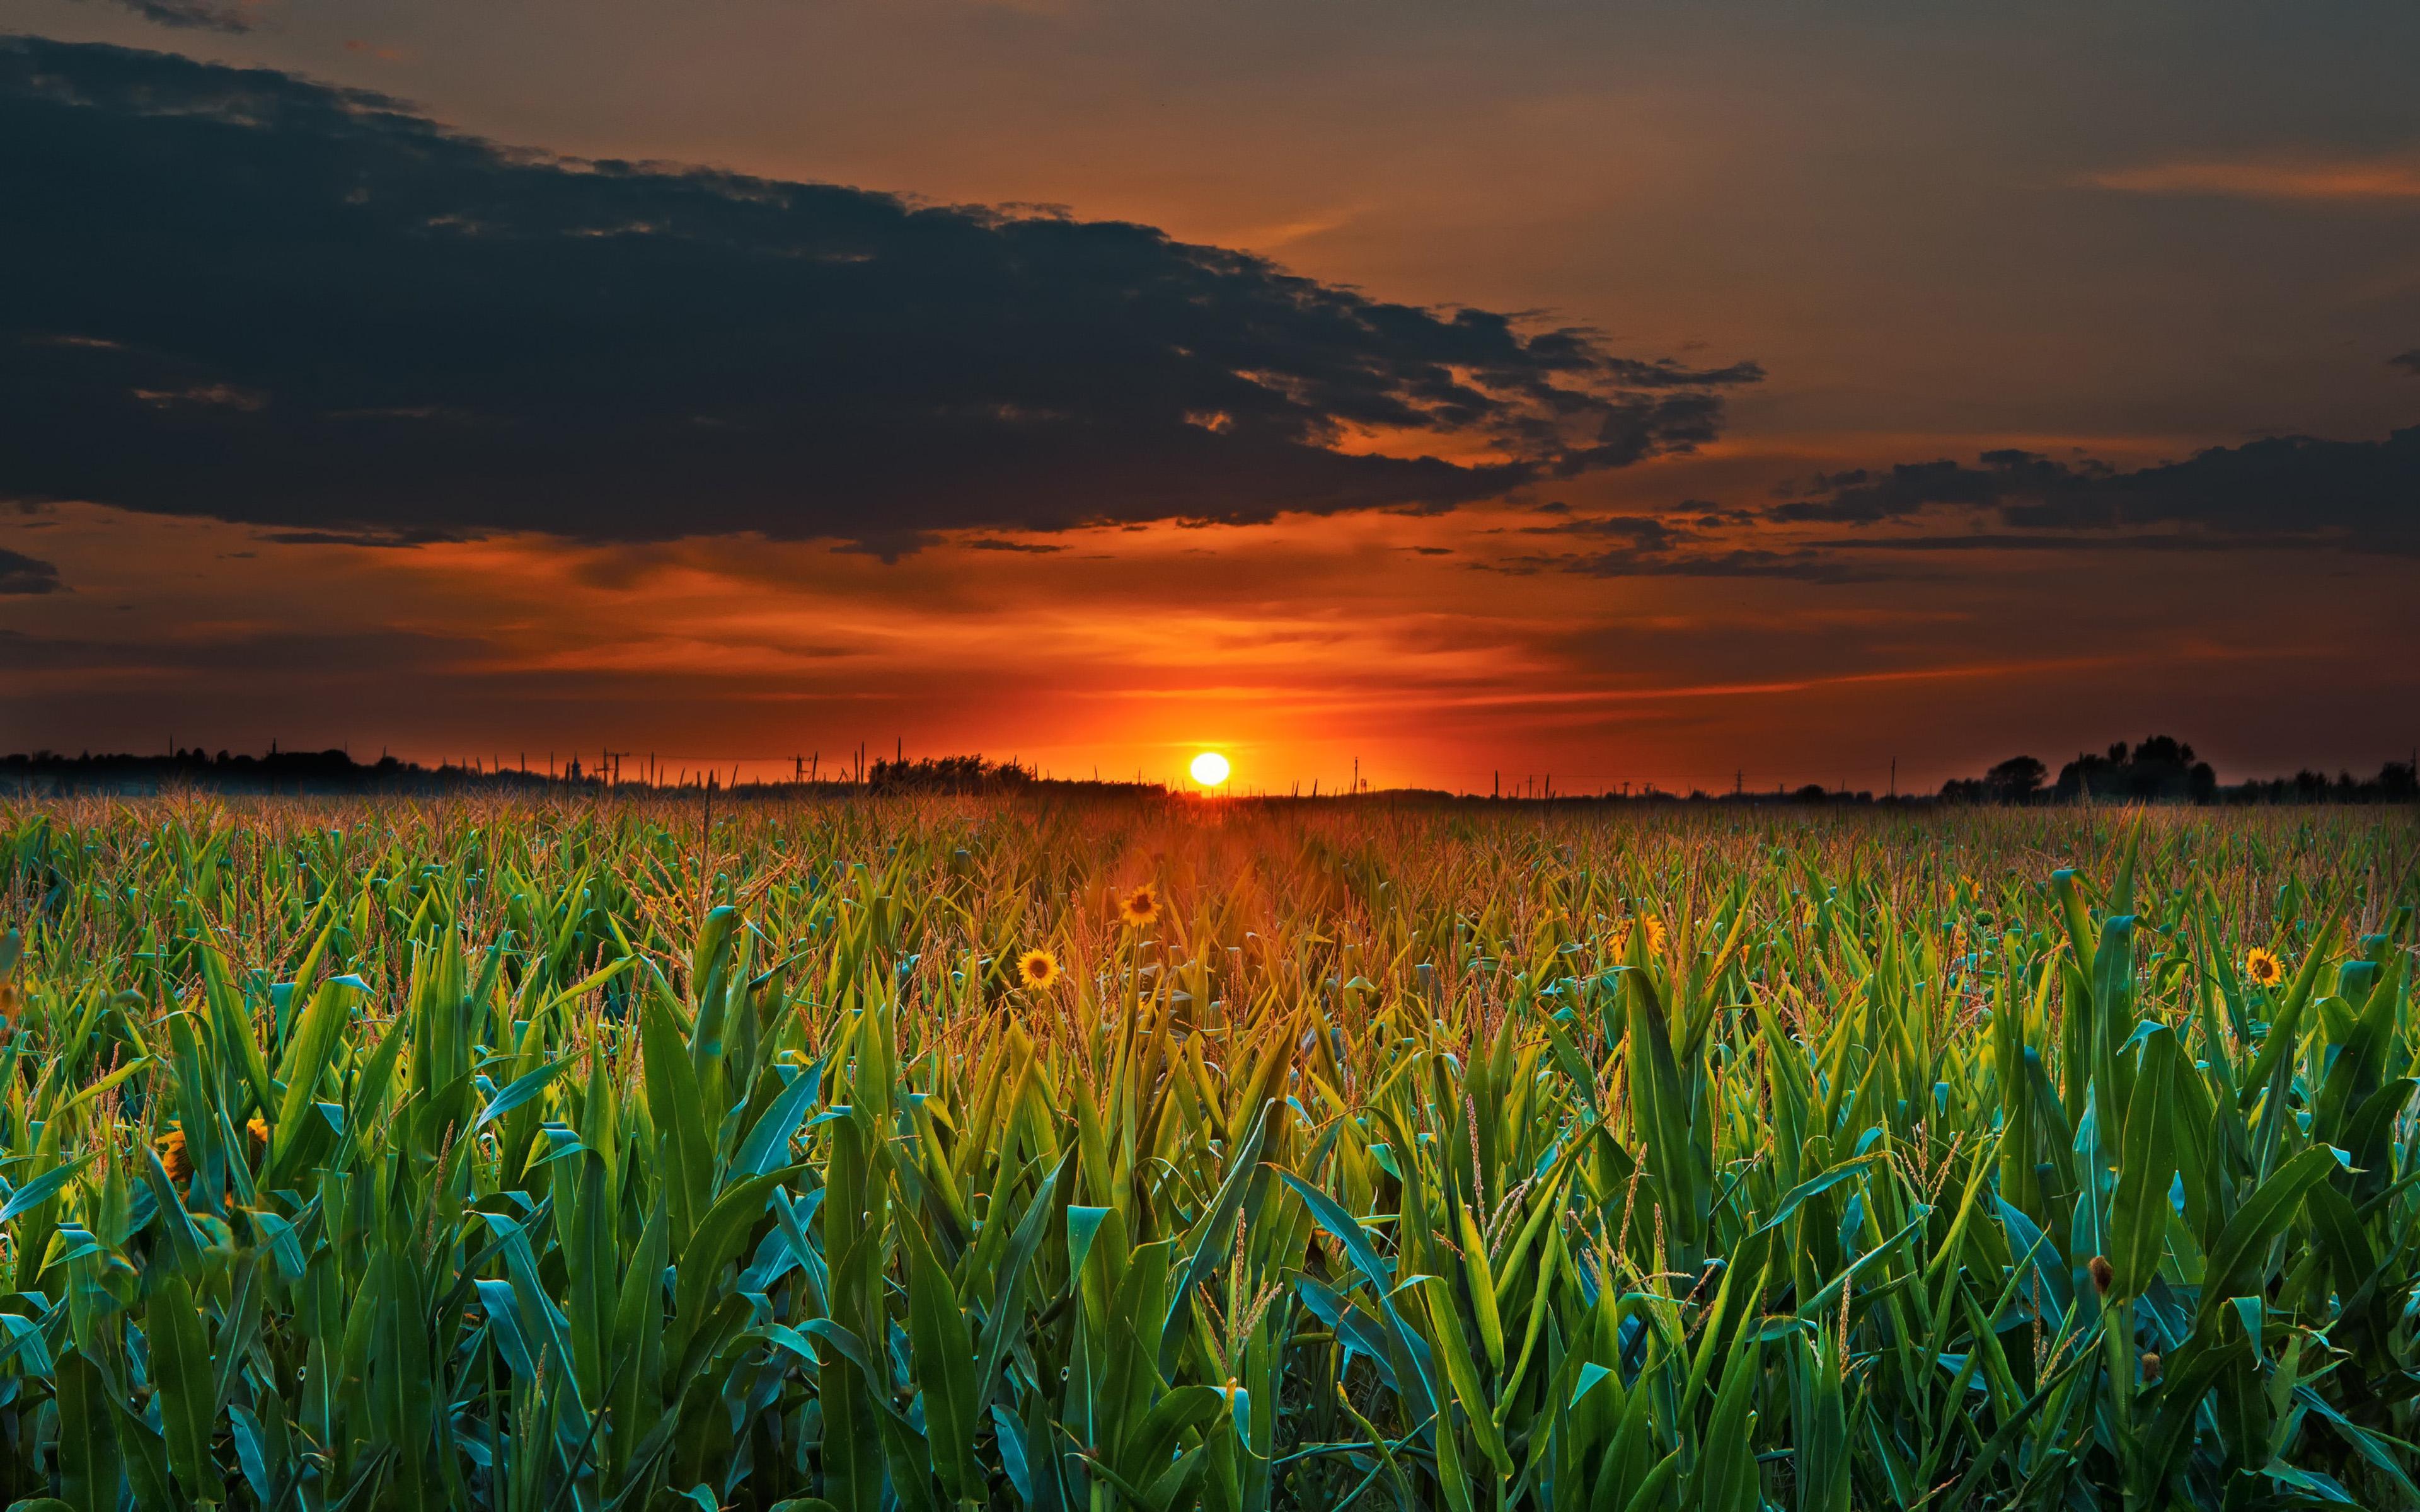 Sunset Green Field With Corn Dark Clouds 4k Ultra HD Desktop Wallpaper For Computers Laptop Tablet And Mobile Phones 3840x2400, Wallpaper13.com